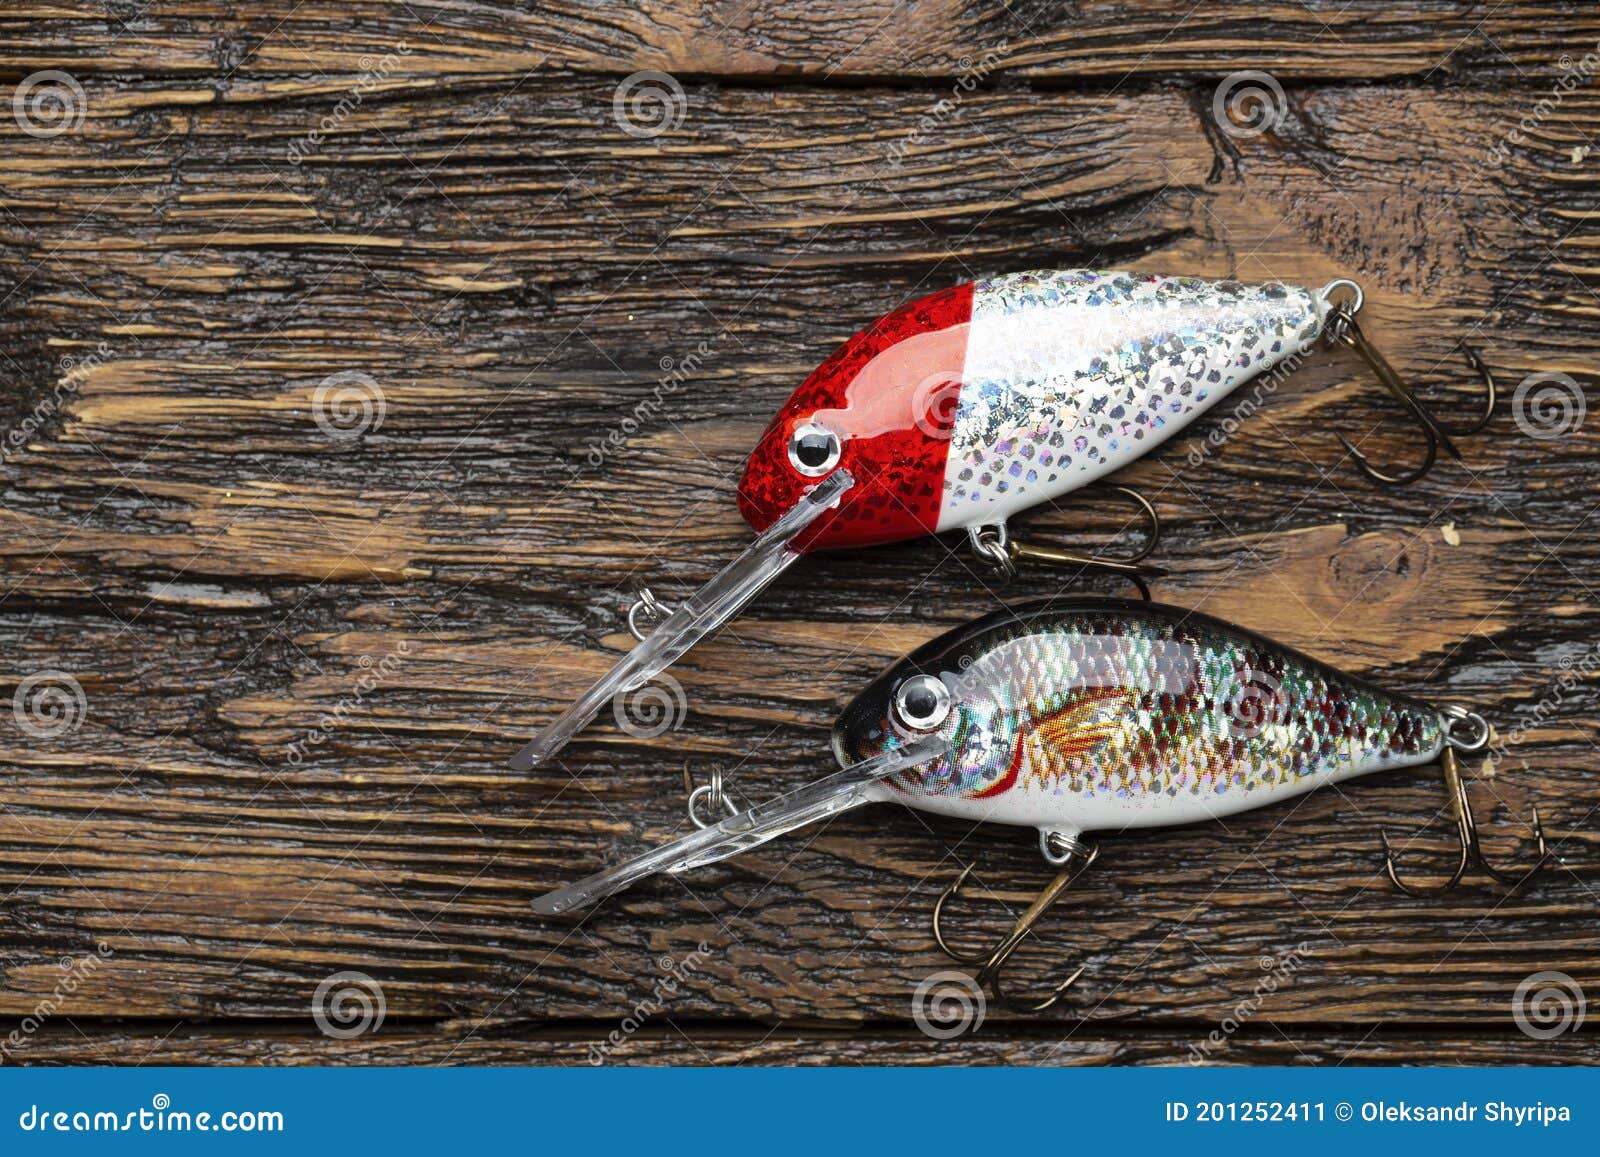 https://thumbs.dreamstime.com/z/wobbler-perch-pike-bait-fishing-tackle-baubles-wood-background-201252411.jpg